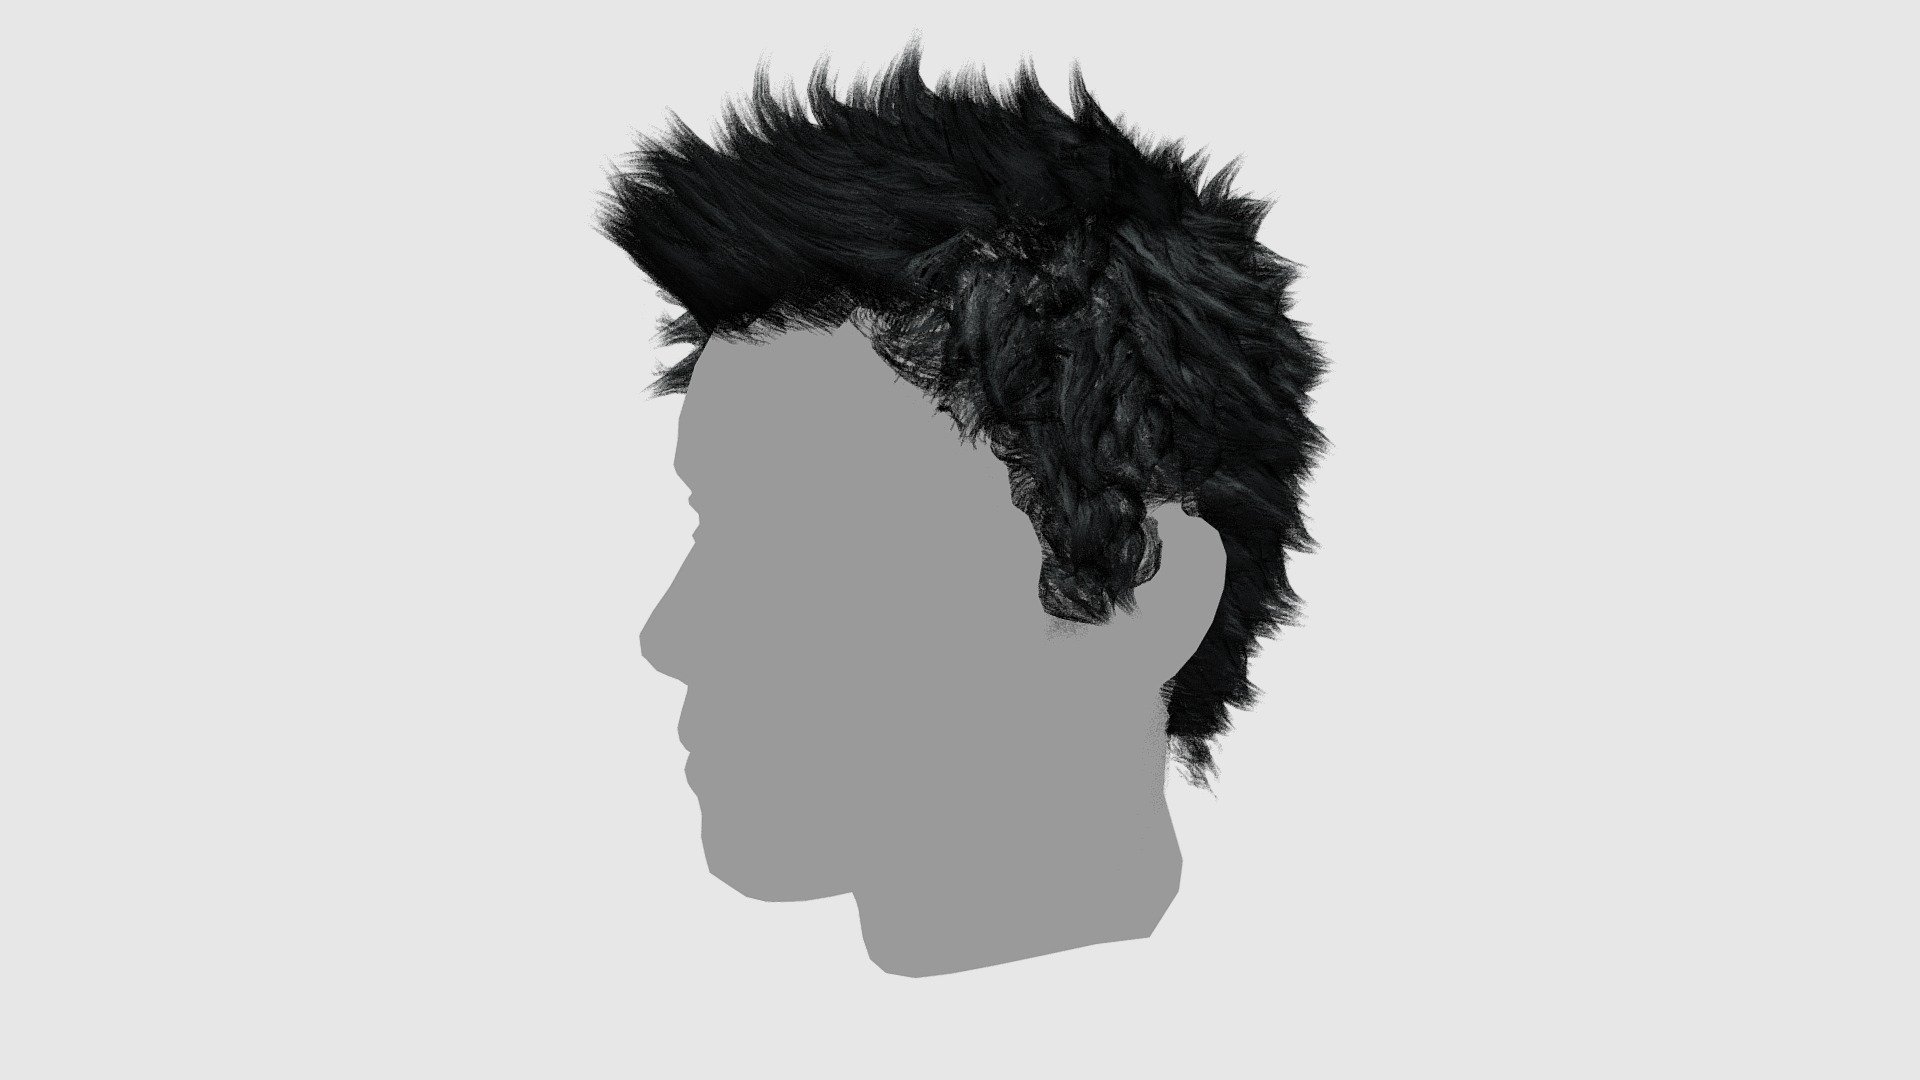 ✨ Check out my website for more products and better deals! 👉 SM5 by Heledahn 👈



This is a digital 3D model of a cool short spikey messy hair style, made with mesh cards and tubes. The model is low-poly, realtime, and is shaded with PBR materials. The coverage of the scalp is of 100%, which means no bald spots, and it looks glorious when animated! ✨

🔹 Perfect fit for your Transhuman4Blender characters!

🔹On my websirte, you can get this model with a Blender file with curves for importing into T4B, nodes, HDRI, updates, and other goodies HERE

This product will achieve realistic results in your rendering projects, being greatly suited for close-ups due to their high quality topology and PBR shading.

 - Short Spikey Messy Hair (Mesh) - T4B compatible* - Buy Royalty Free 3D model by SM5 by Heledahn (@heledahn) 3d model